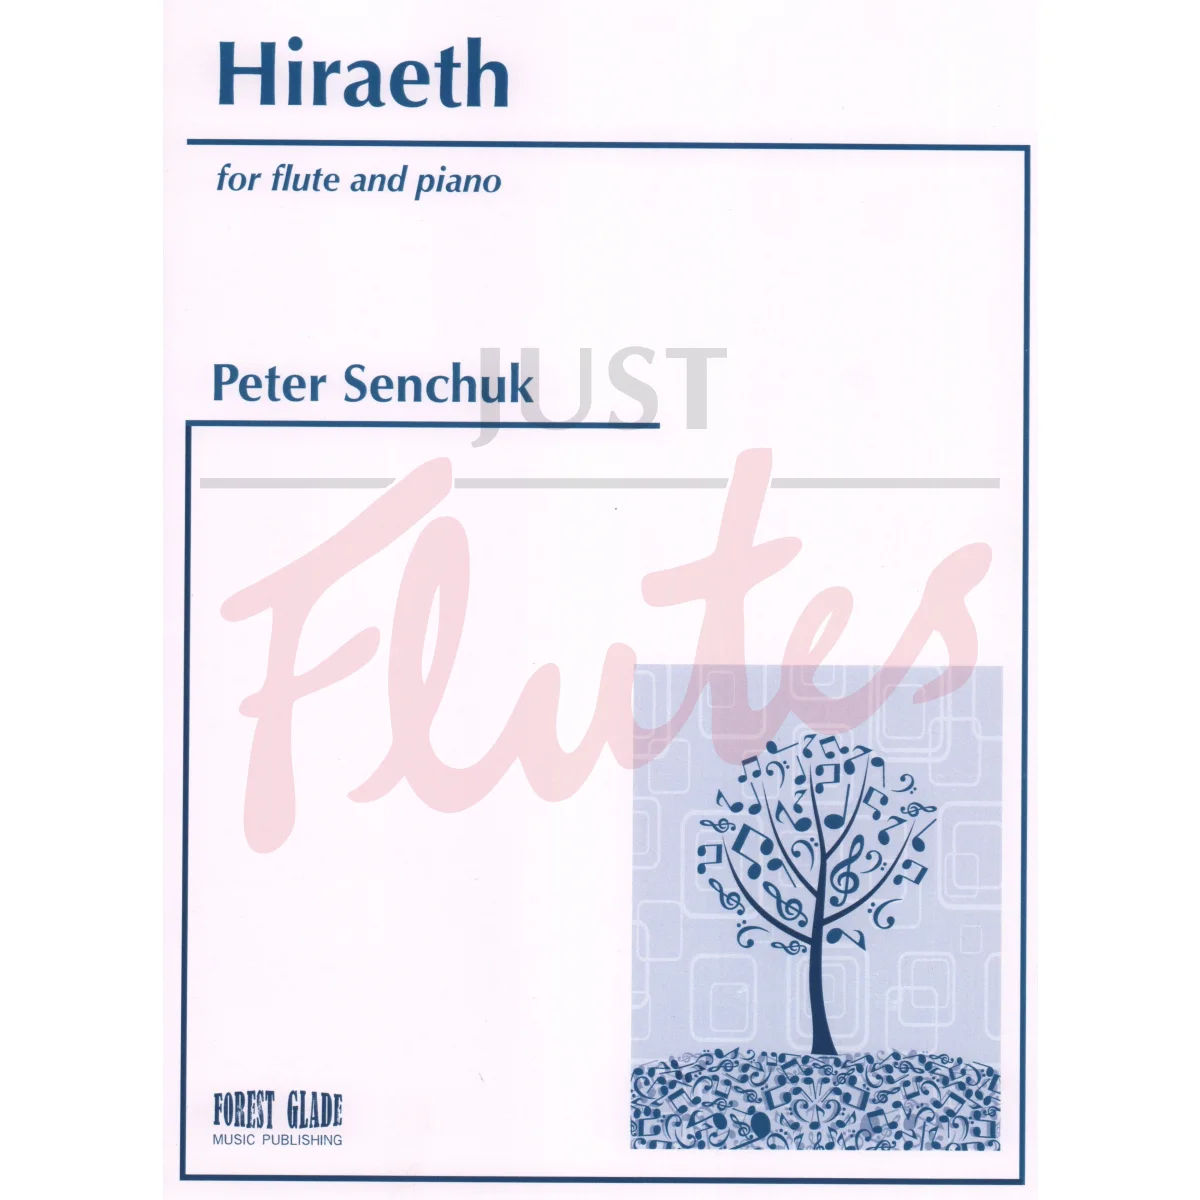 Hiraeth for Flute and Piano